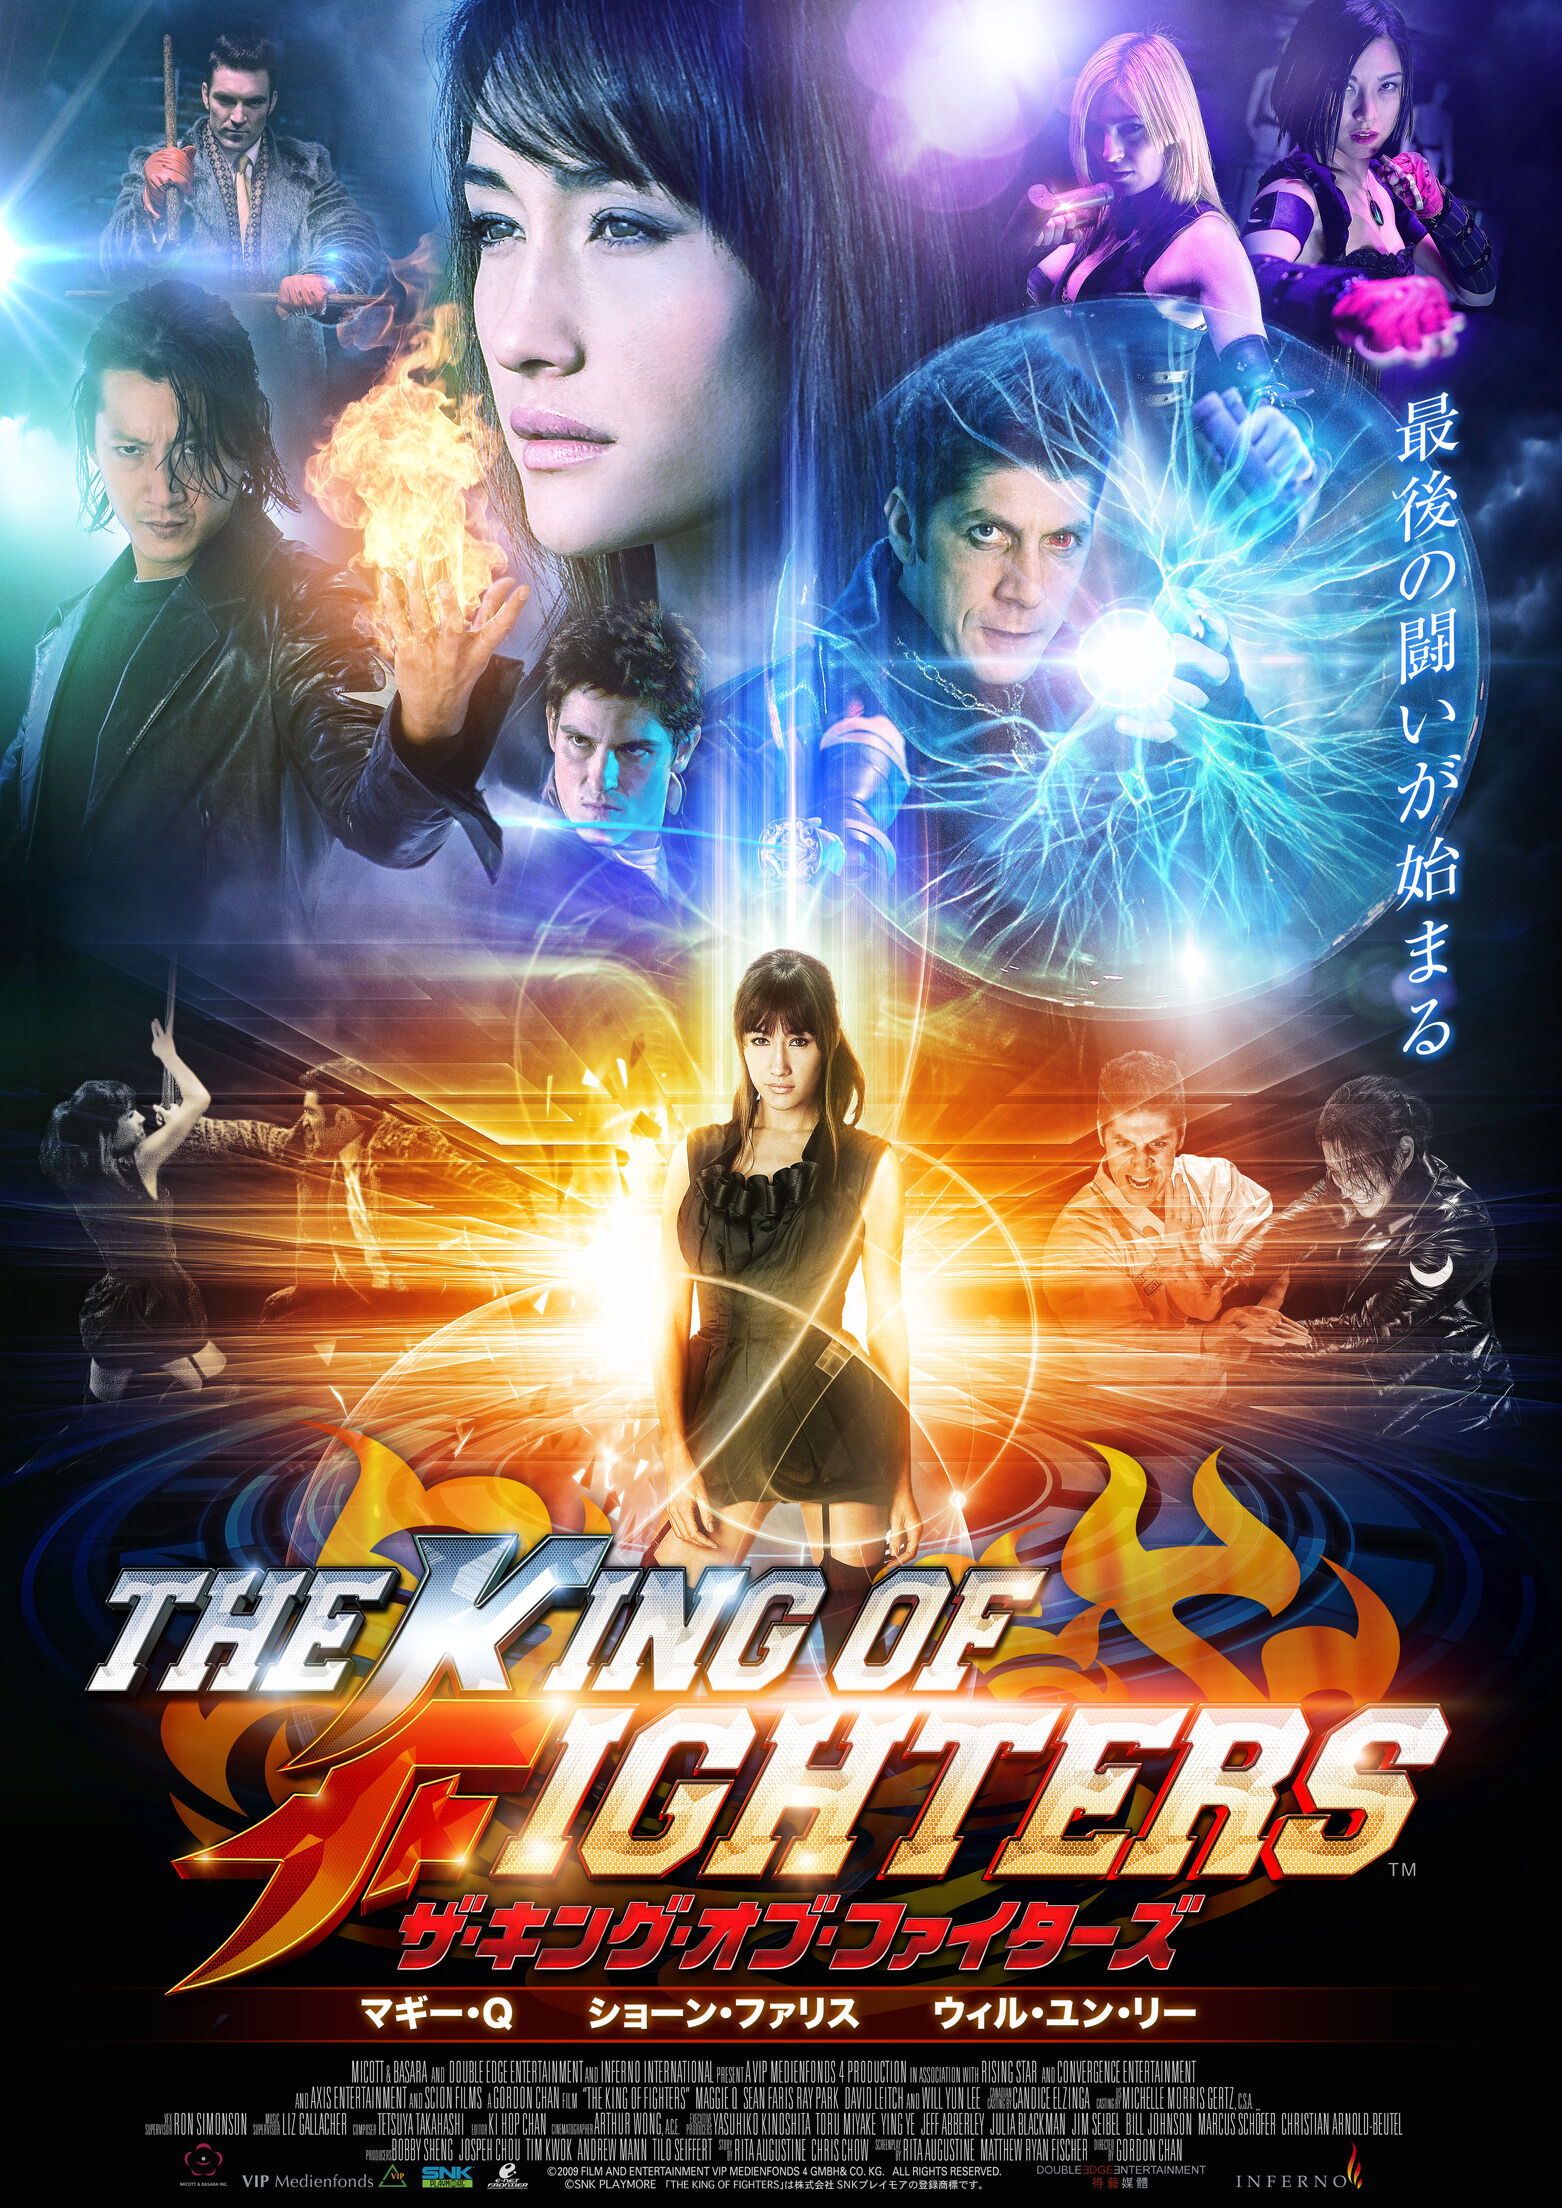 Debut trailer for The King of Fighters: Awaken film released